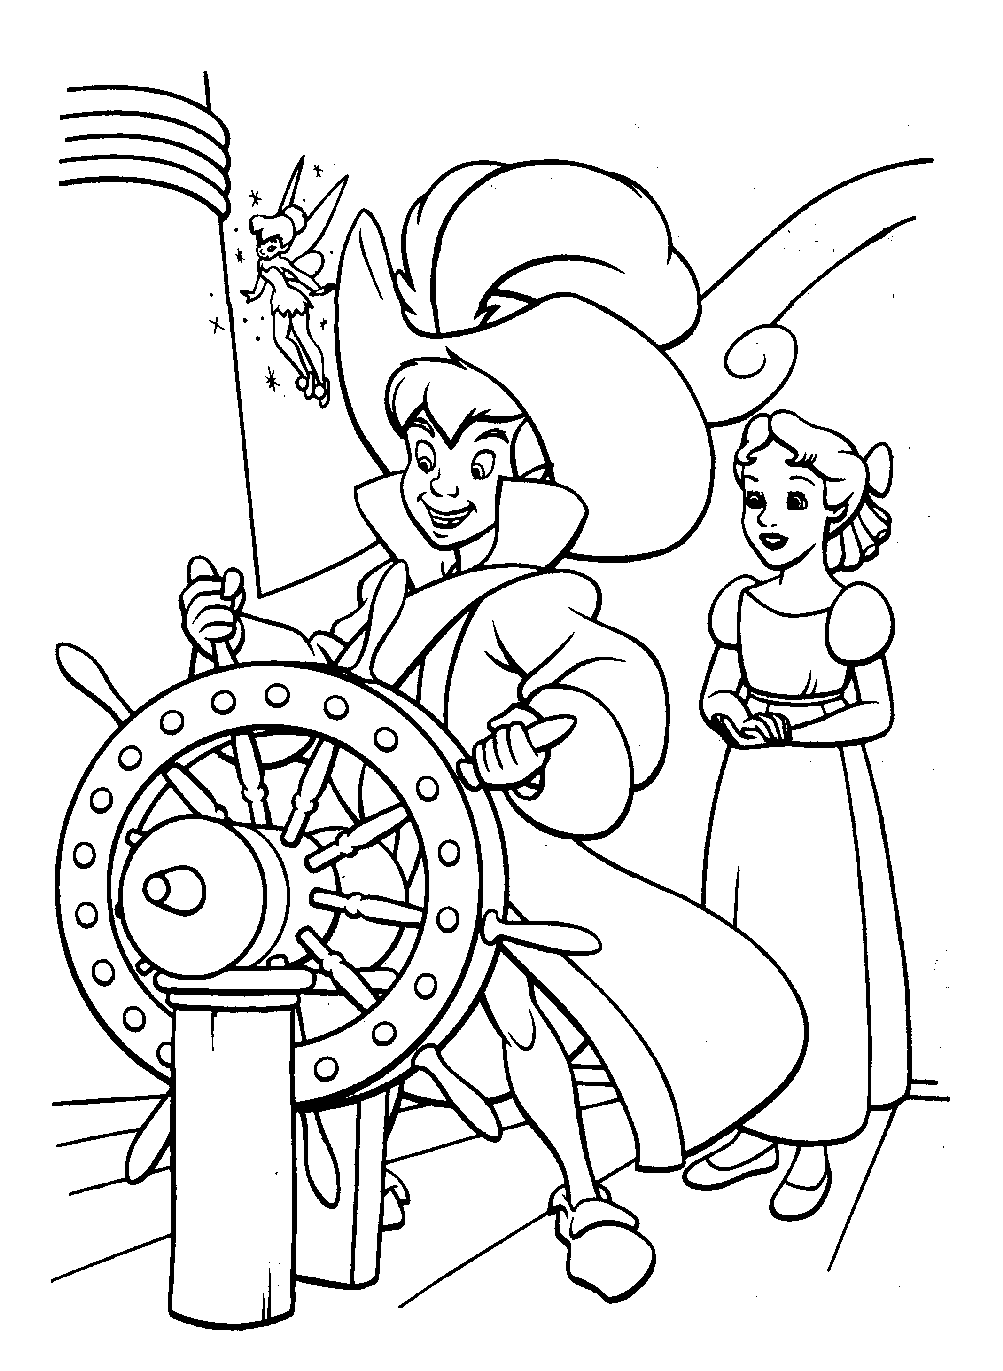 Beautiful Peter Pan coloring page to print and color